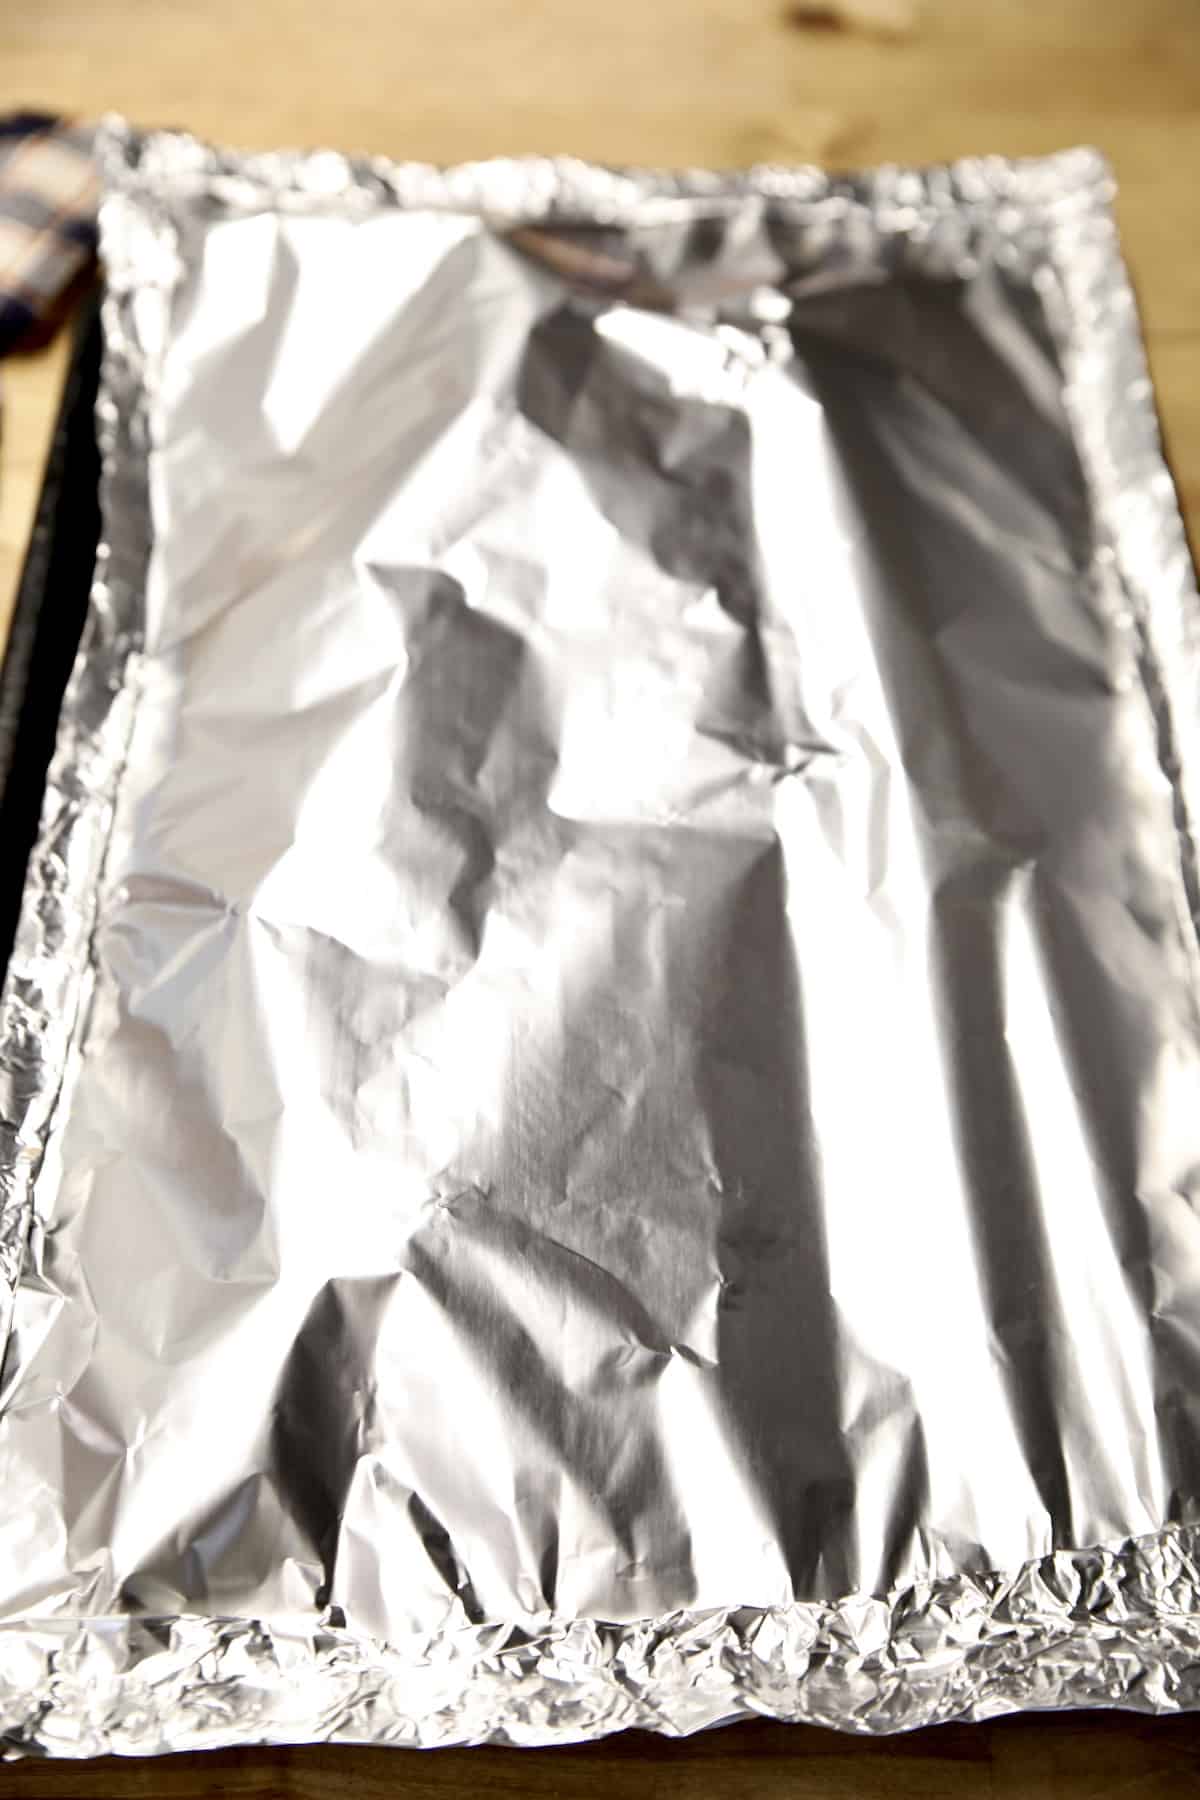 Foil packet with 2 racks ribs.